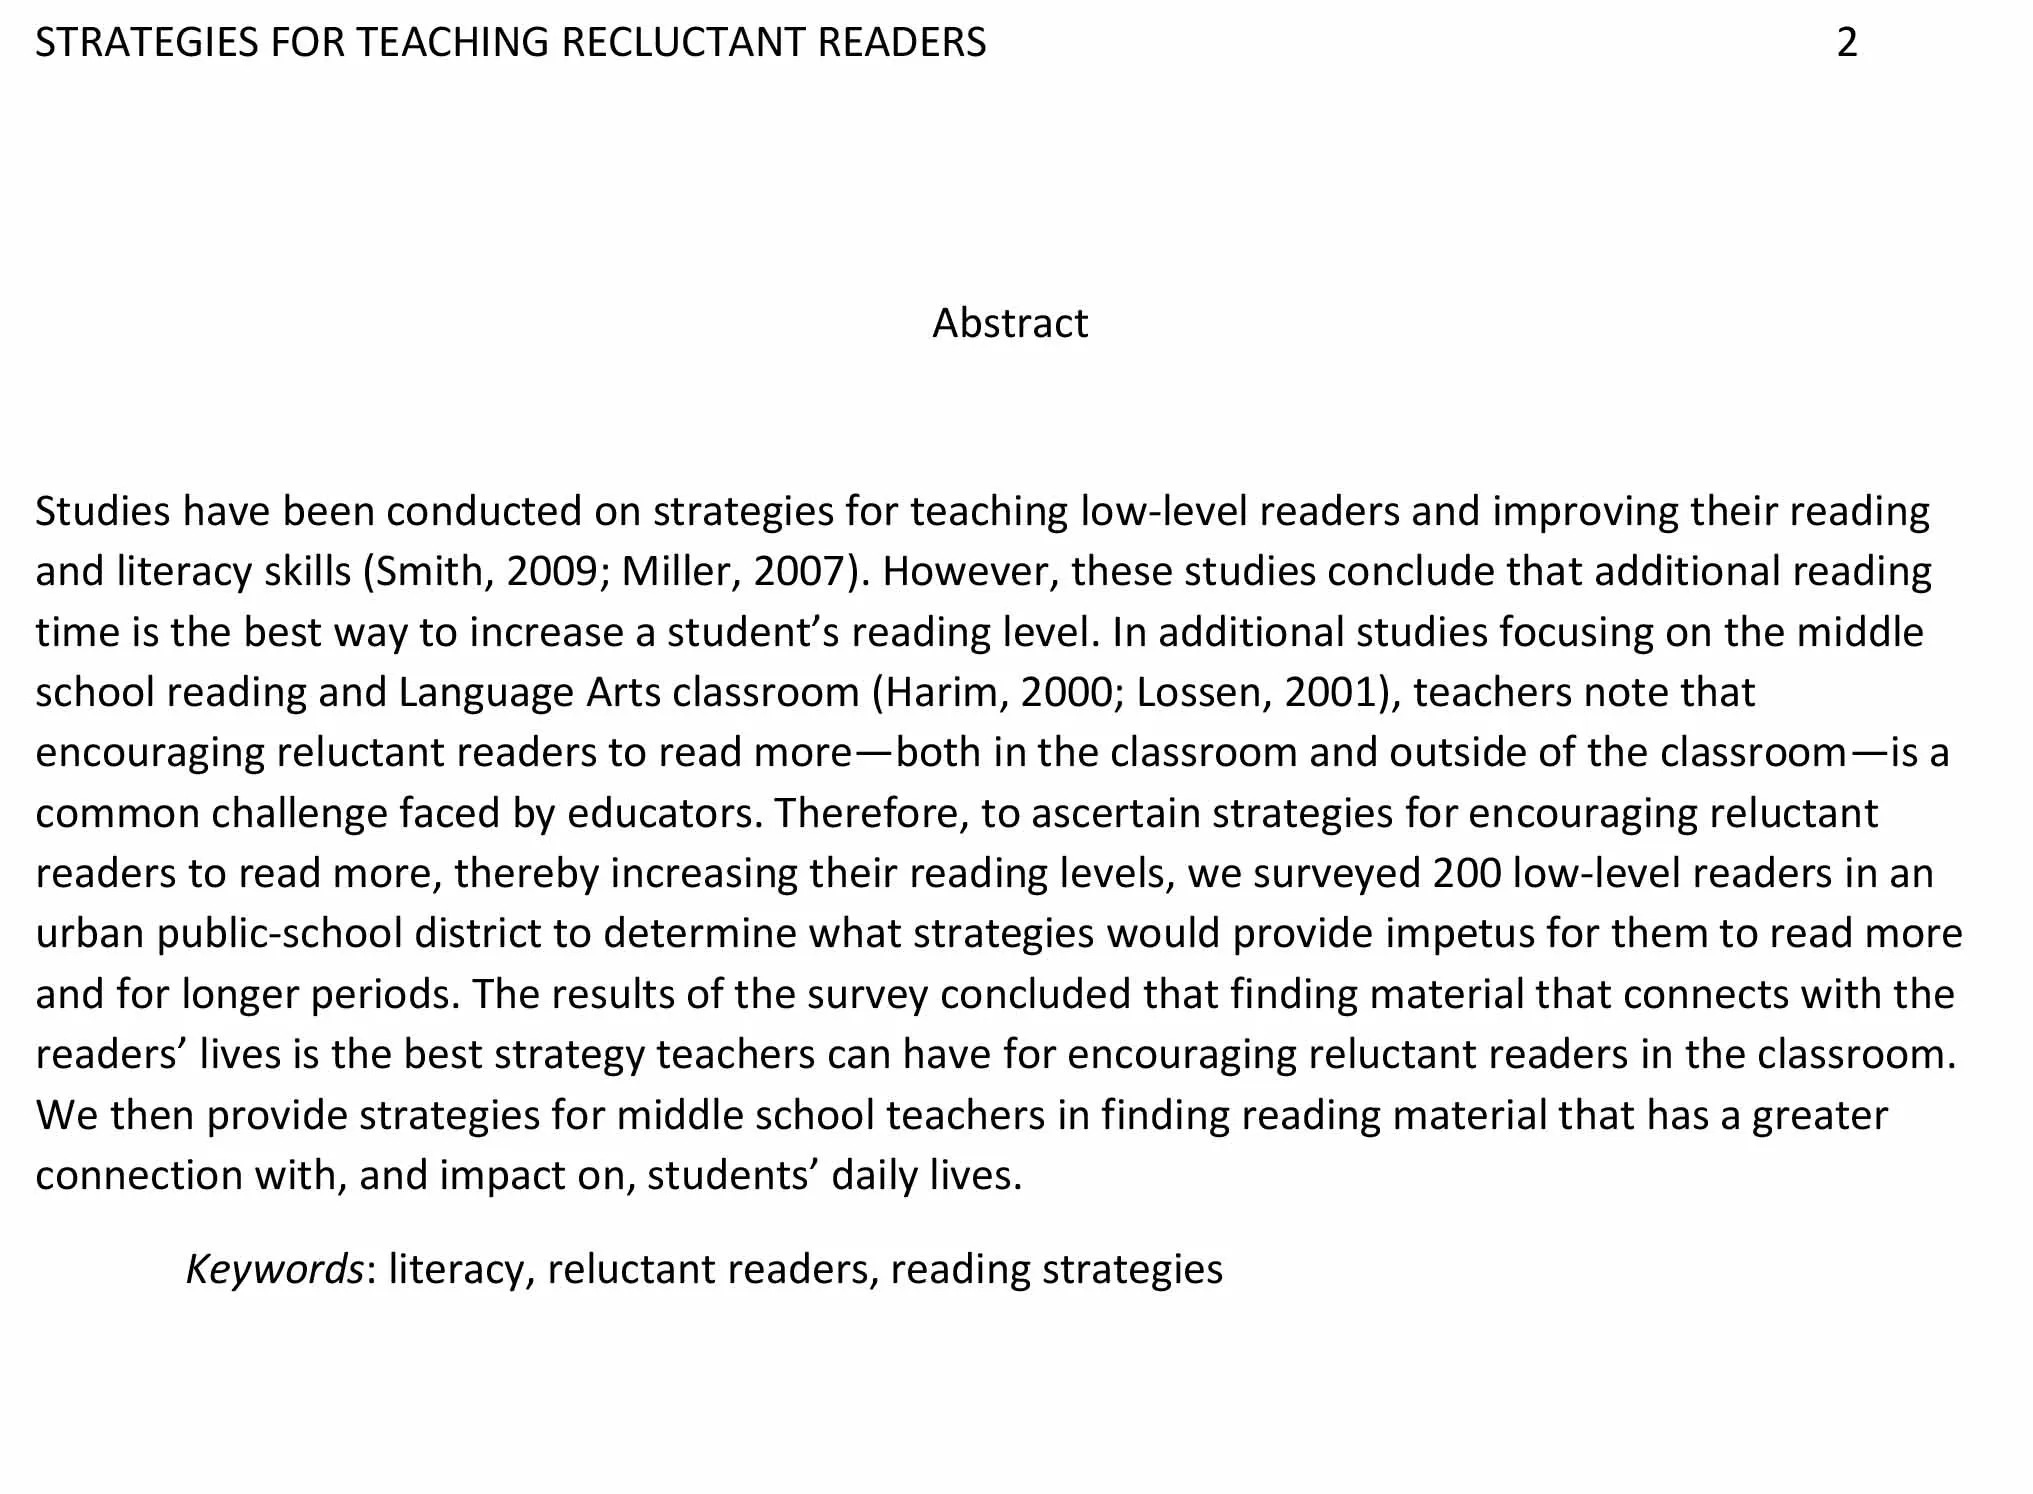 This is a sample APA abstract in the field of Education